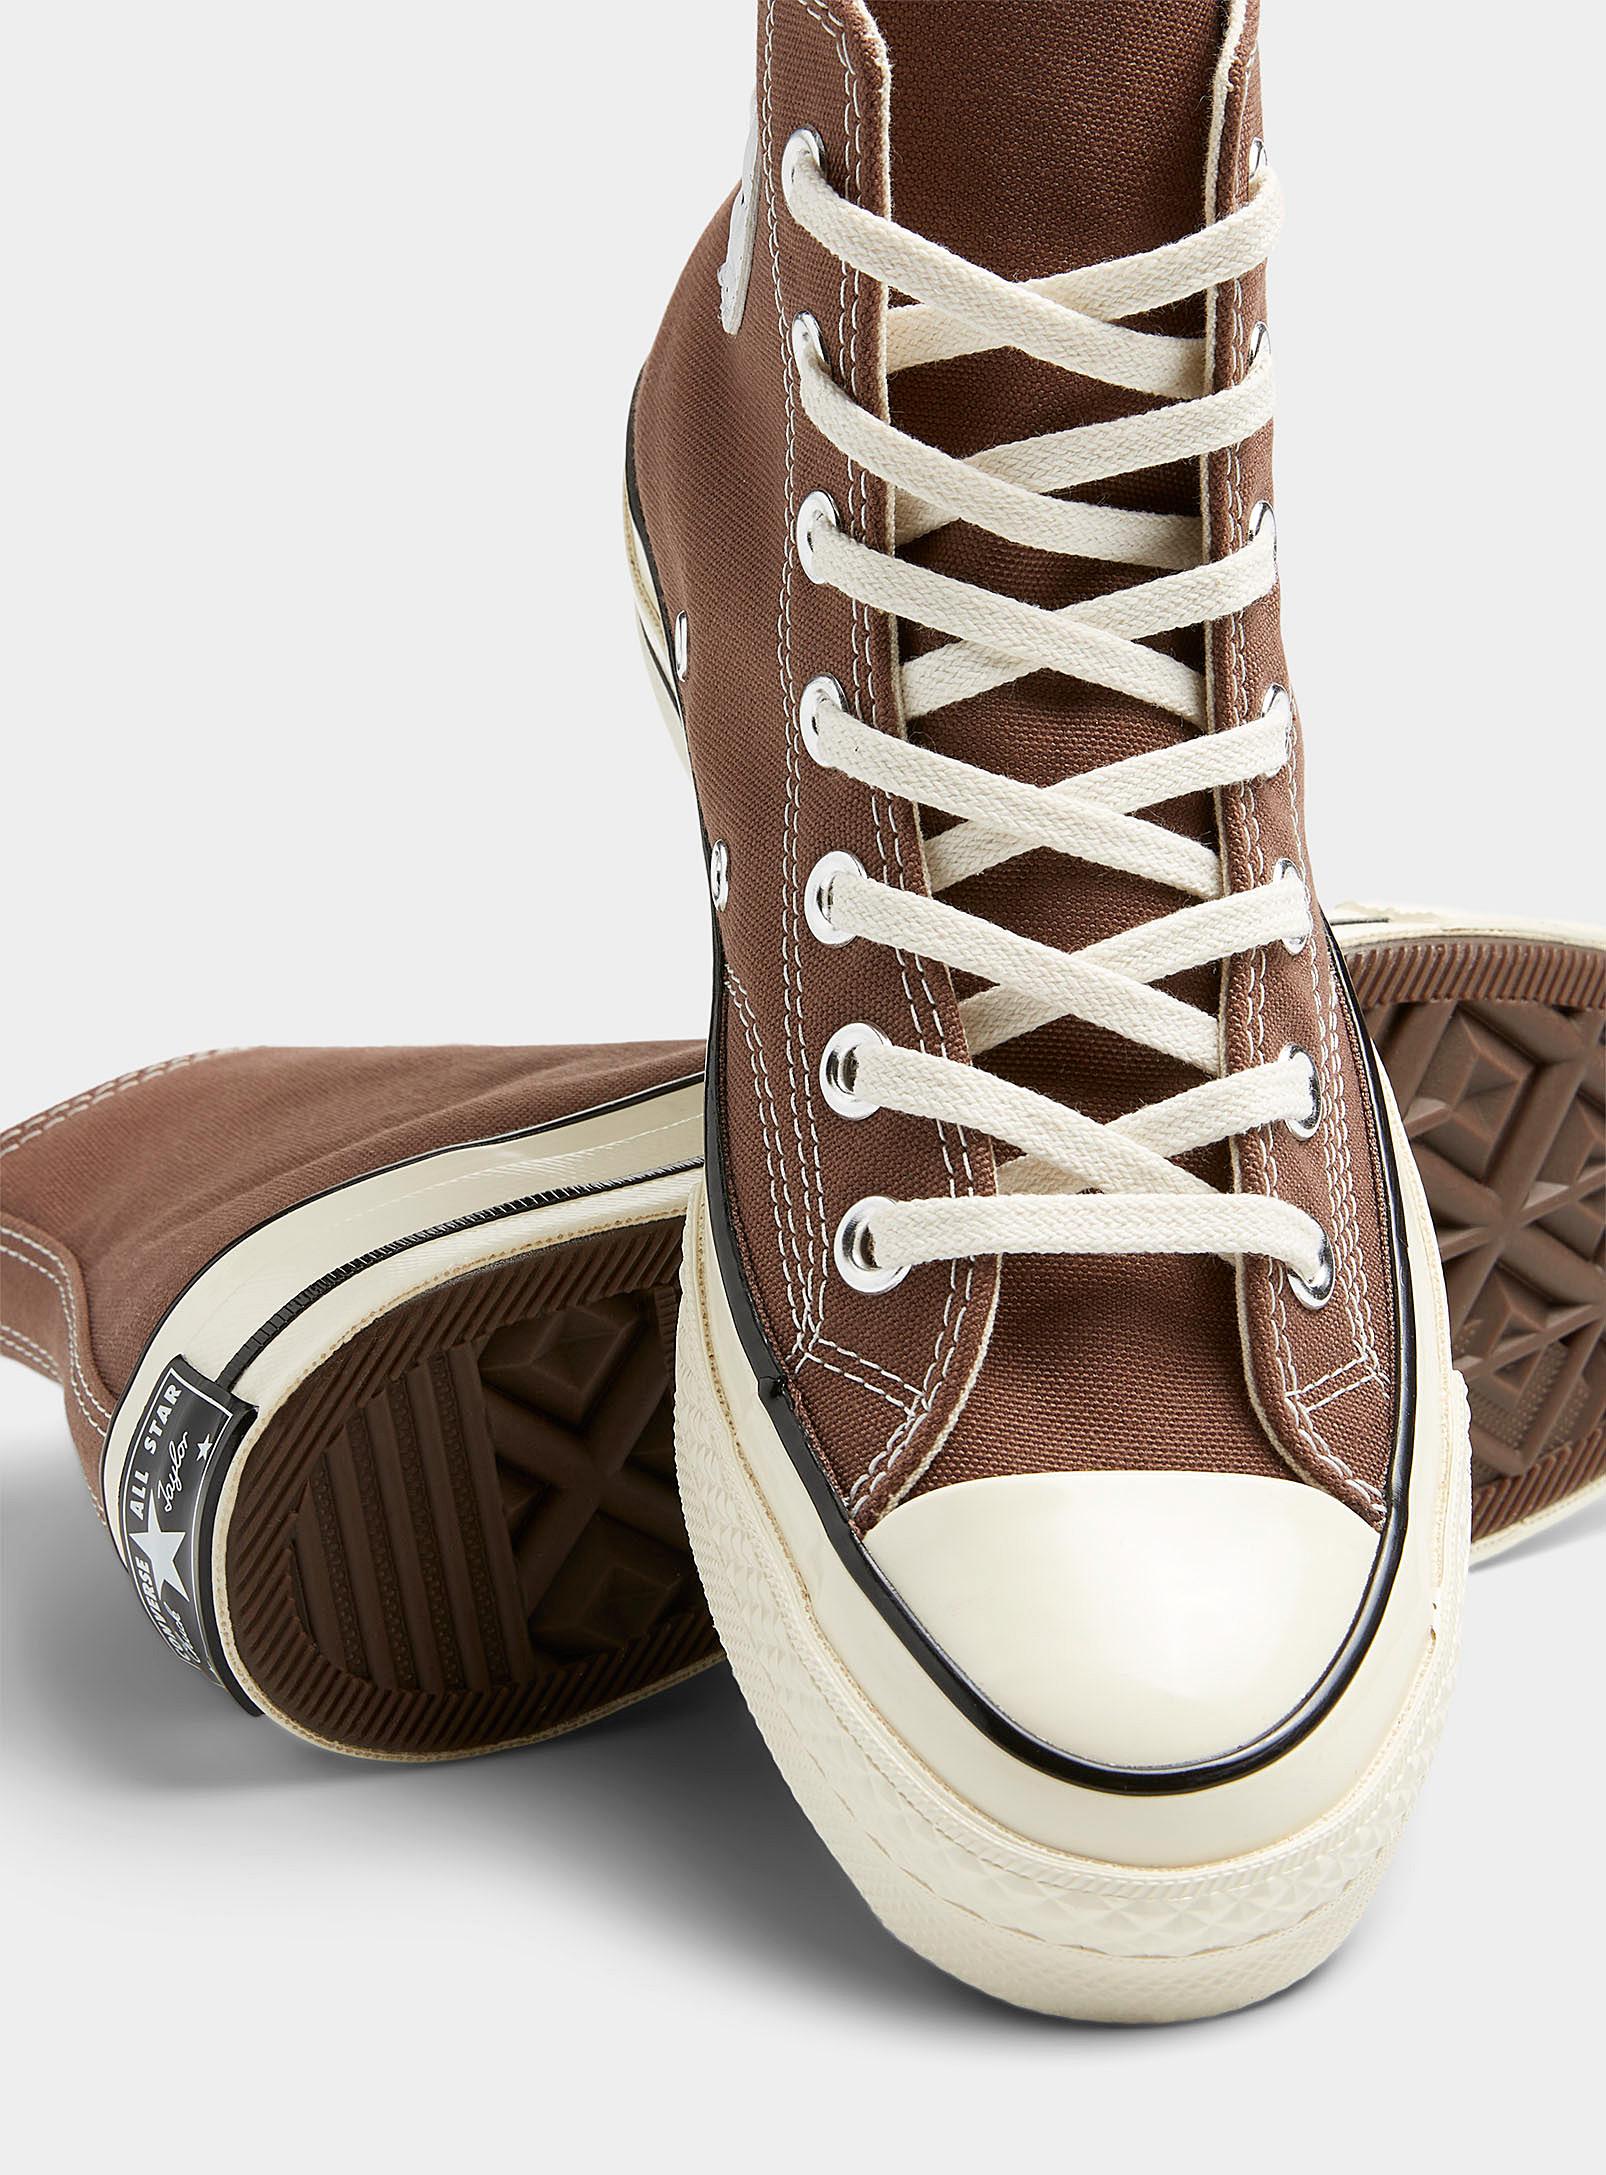 Converse Squirrel Brown Chuck 70 High Top Sneakers Women | Lyst